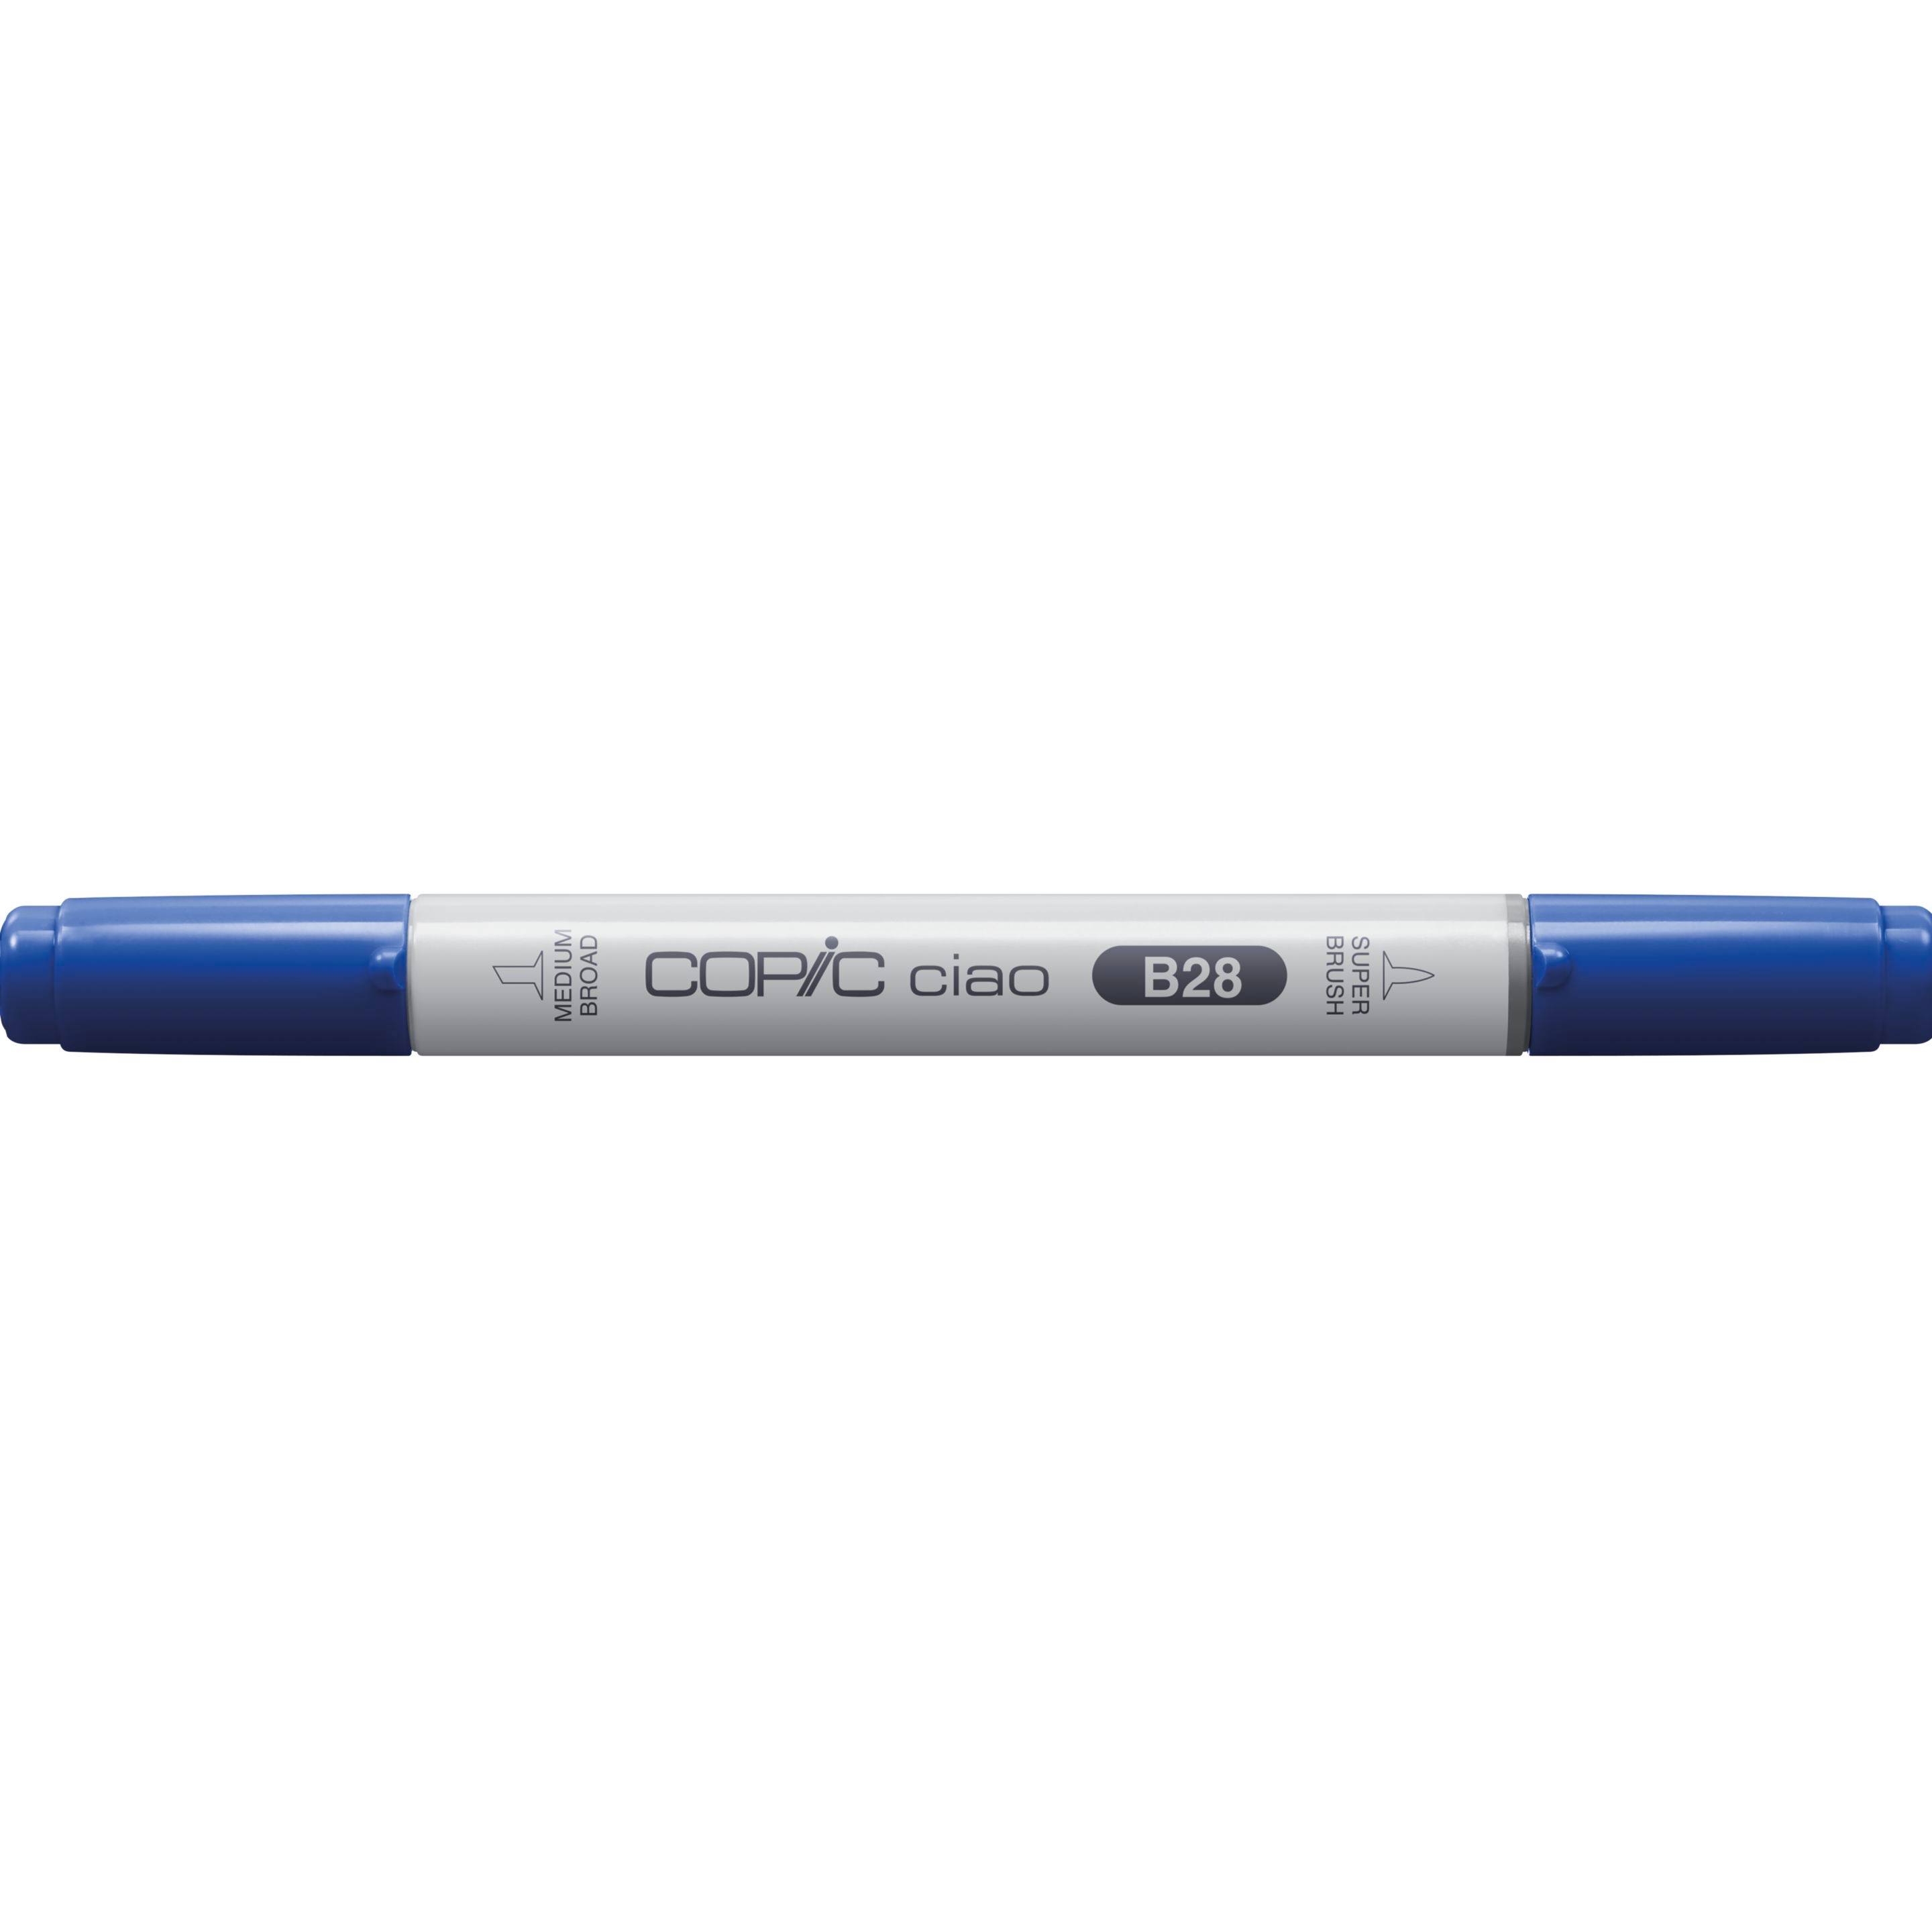 COPIC Marker Ciao 22075305 B28 - Royal Blue